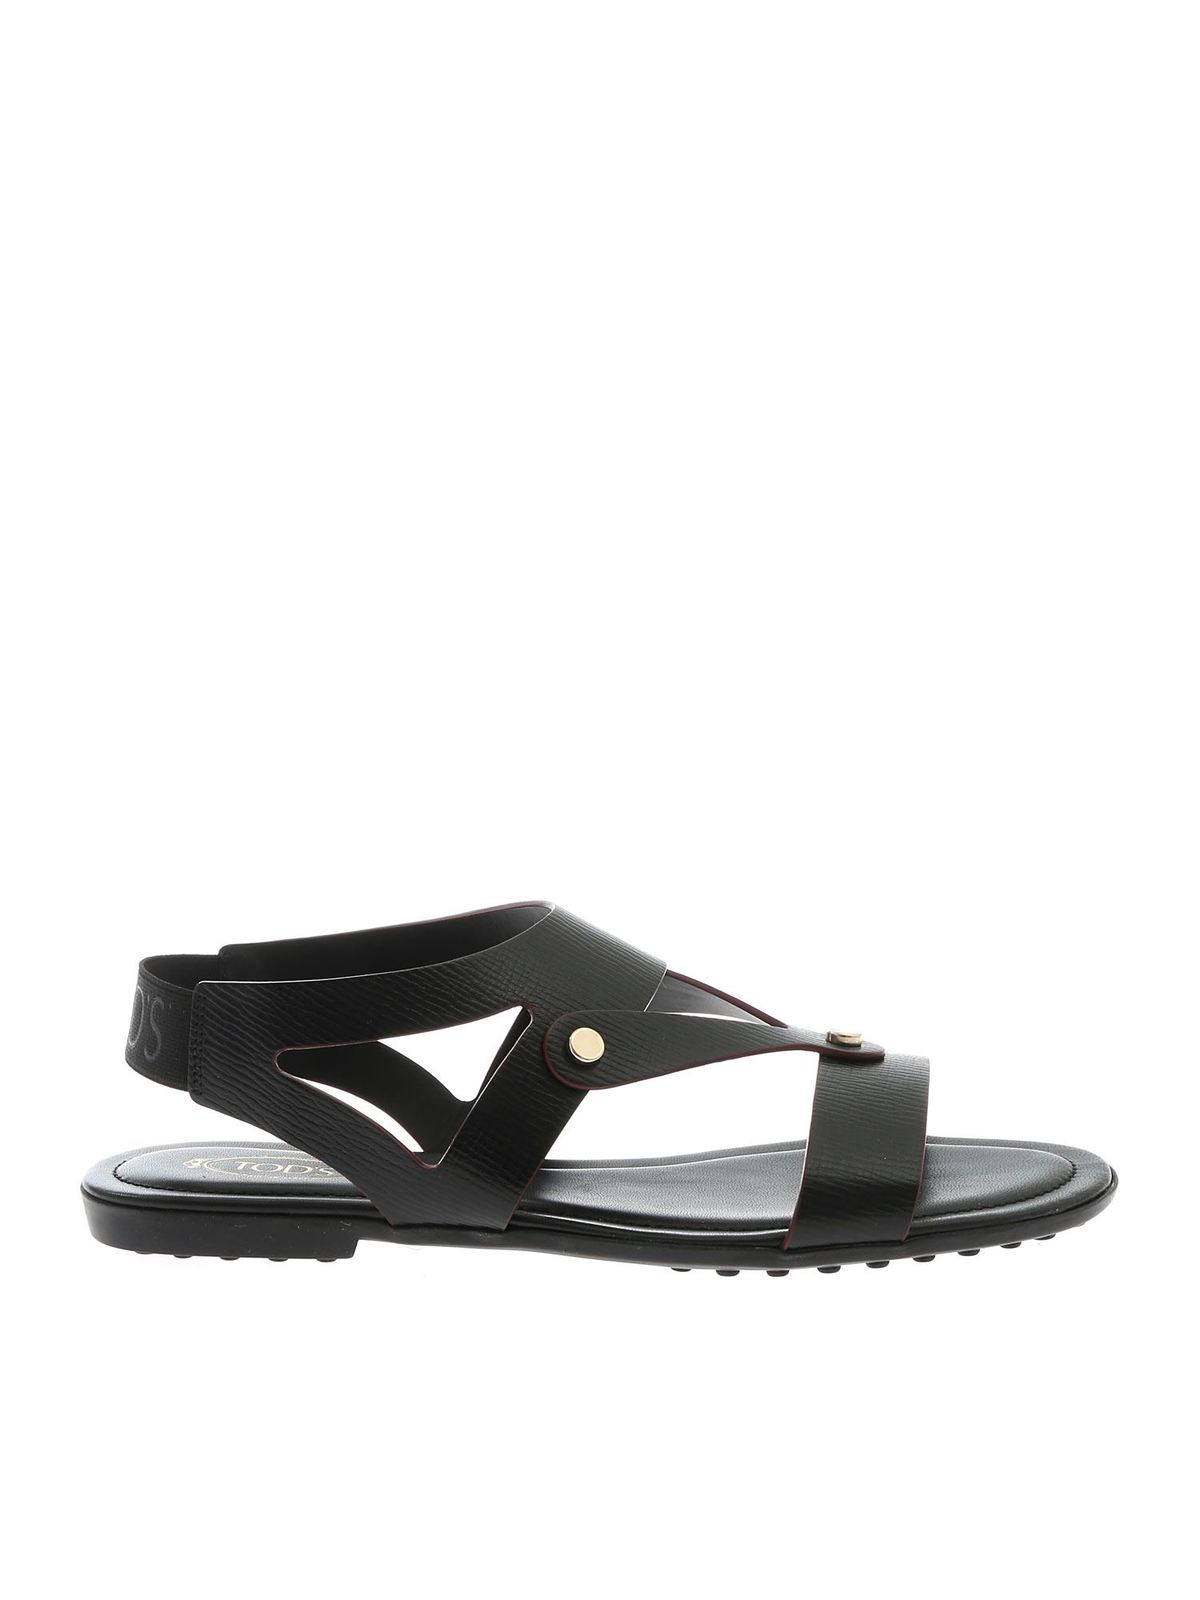 TOD'S BLACK SANDALS WITH METAL DETAILS